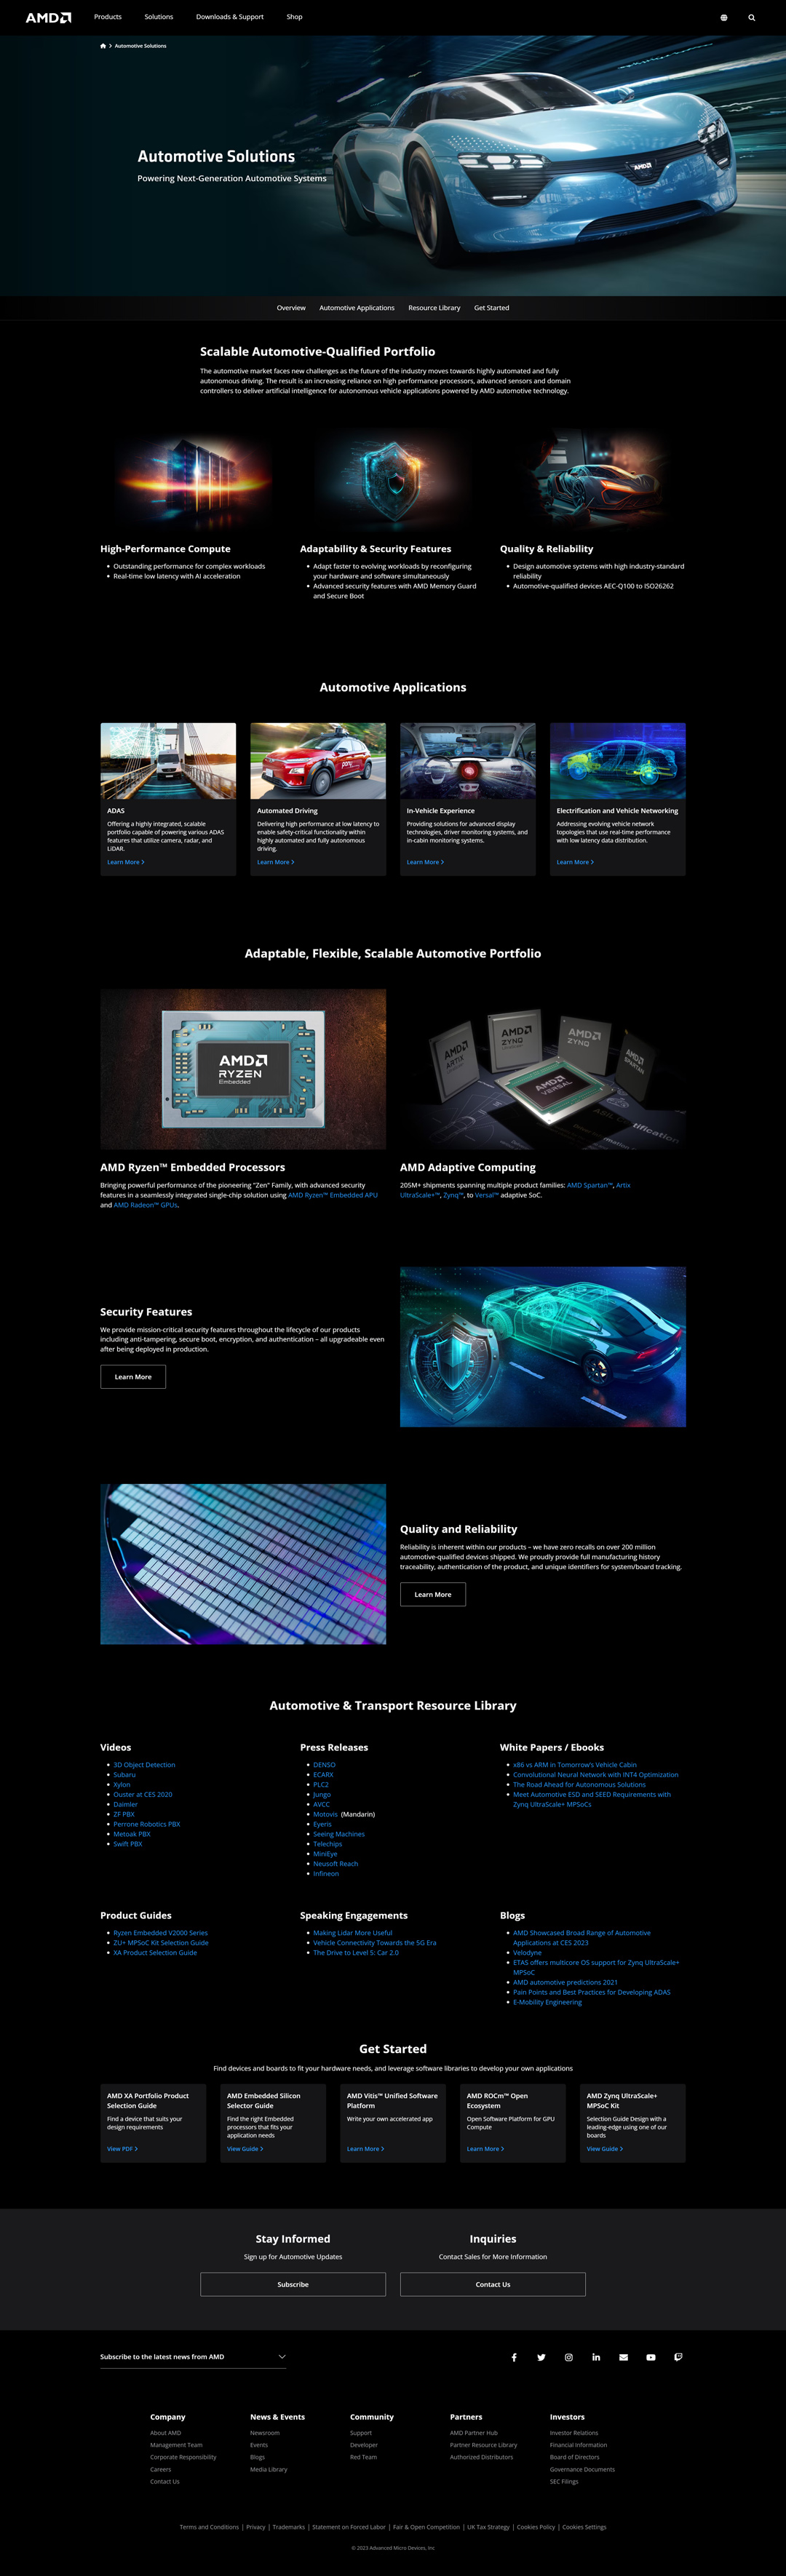 AMD Automotive Solutions web page